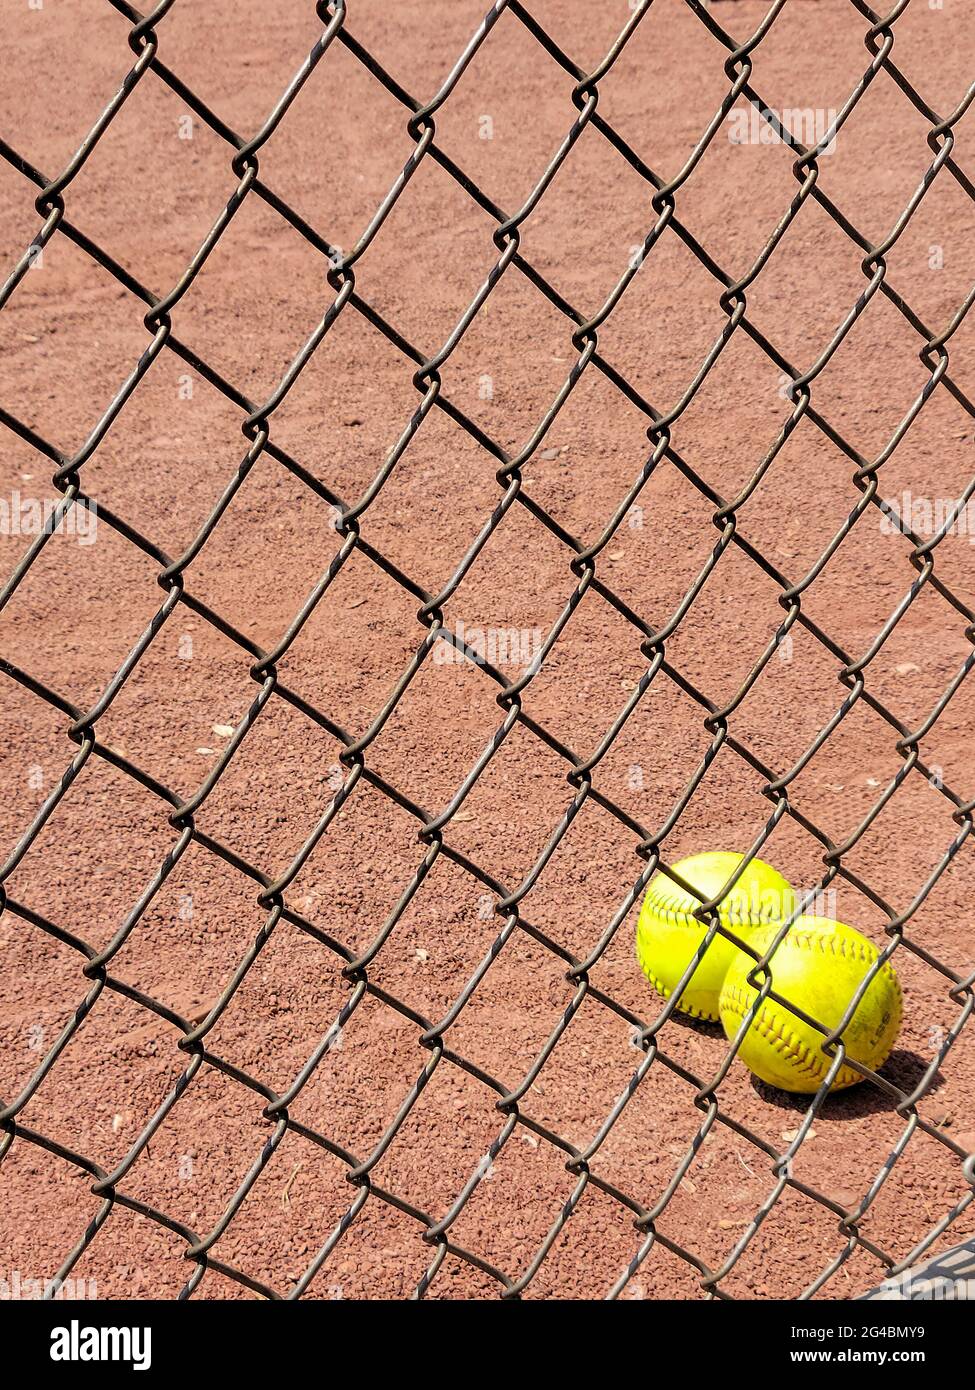 Pair of yellow softballs in dirt behind chain link fence Stock Photo